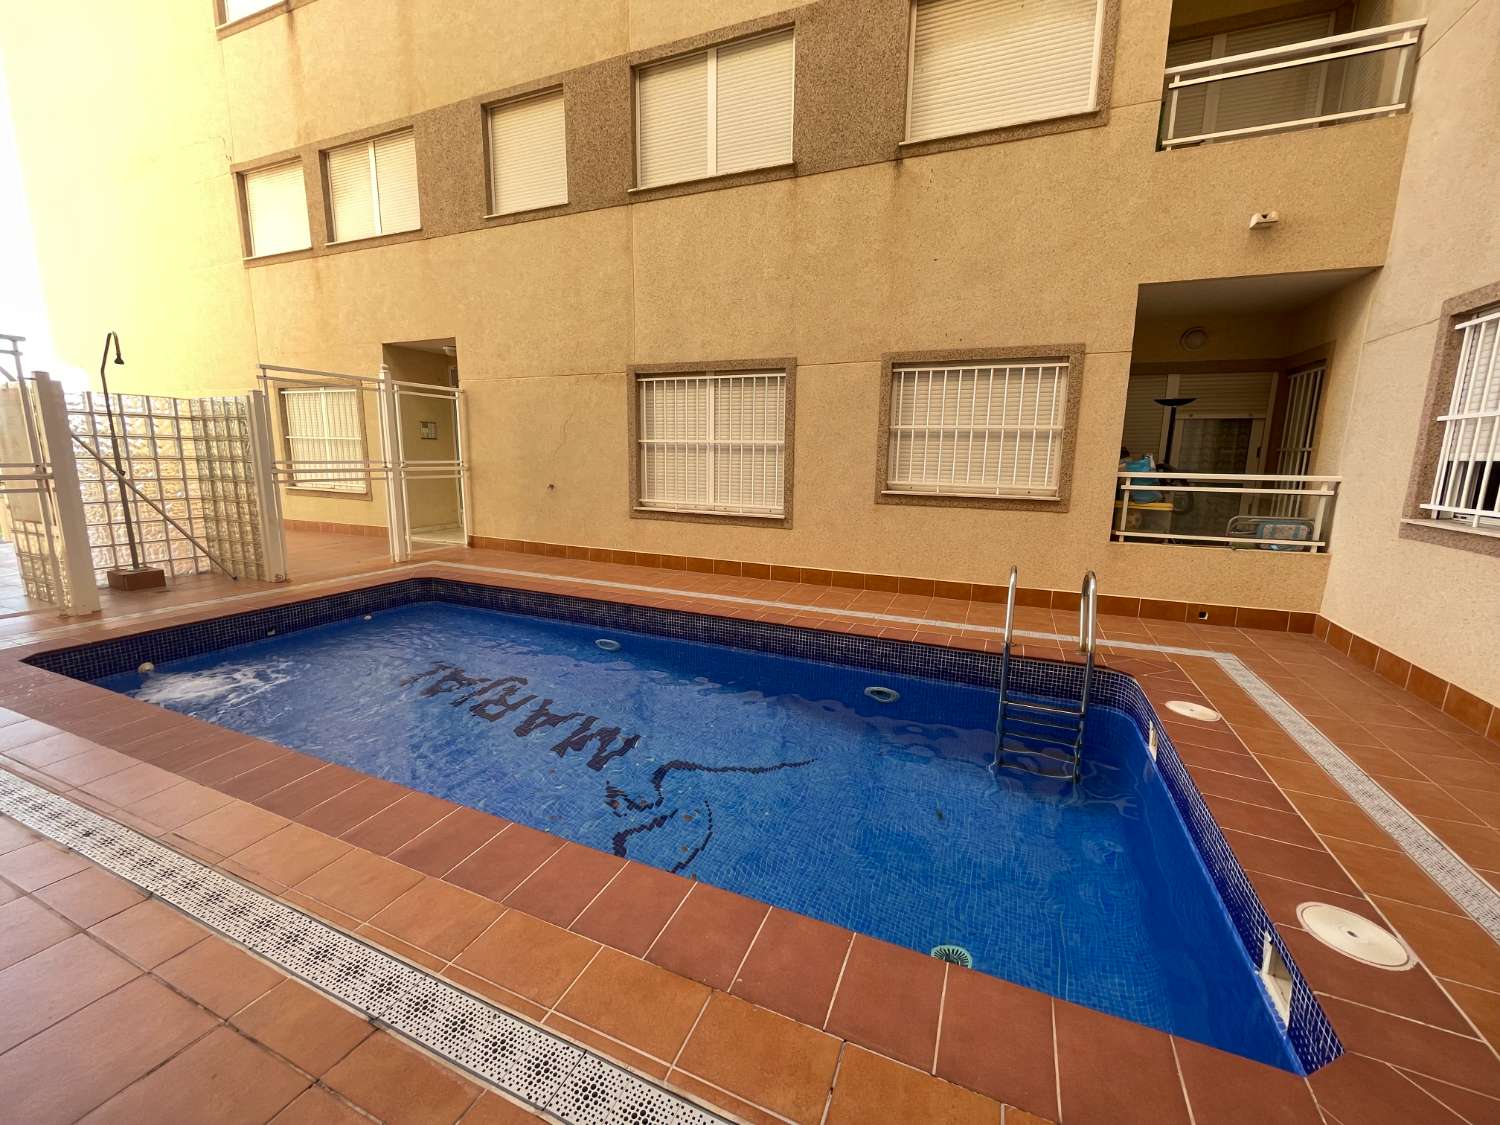 MAKE YOUR OFFER!! 2 BEDROOM APARTMENT WITH POOL!!